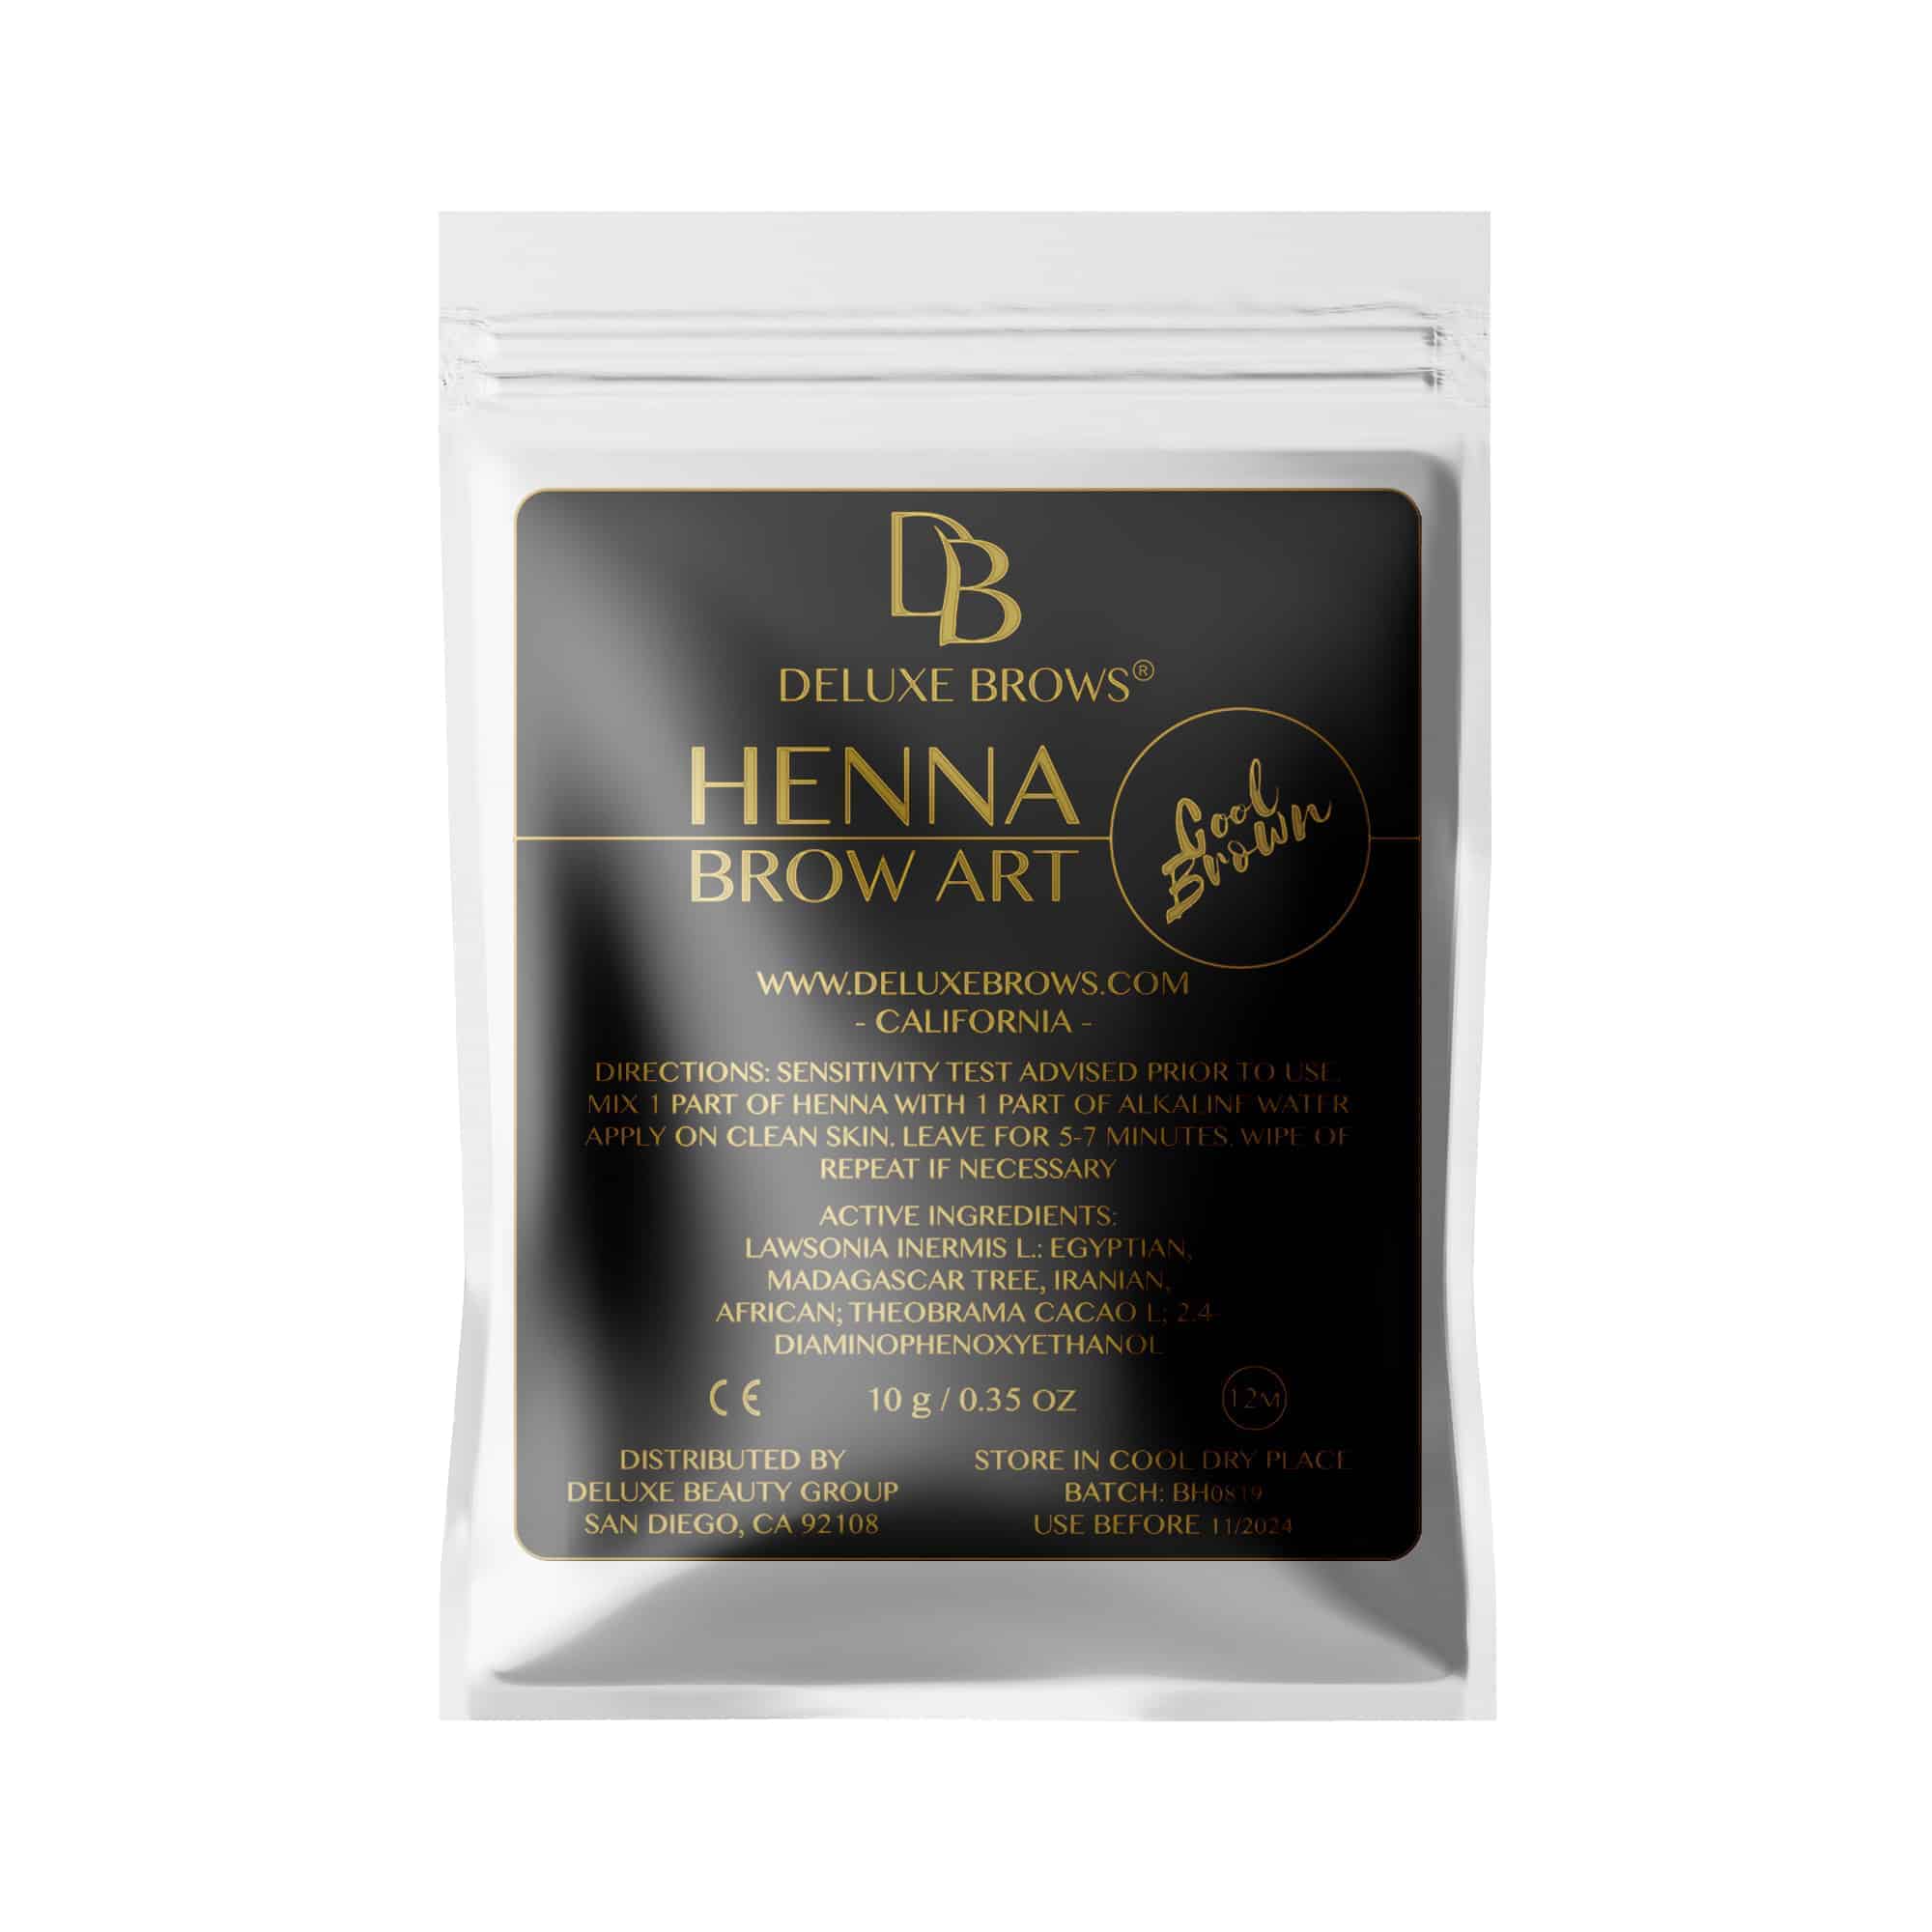 Deluxe Brows® Henna Brow Art Pouches